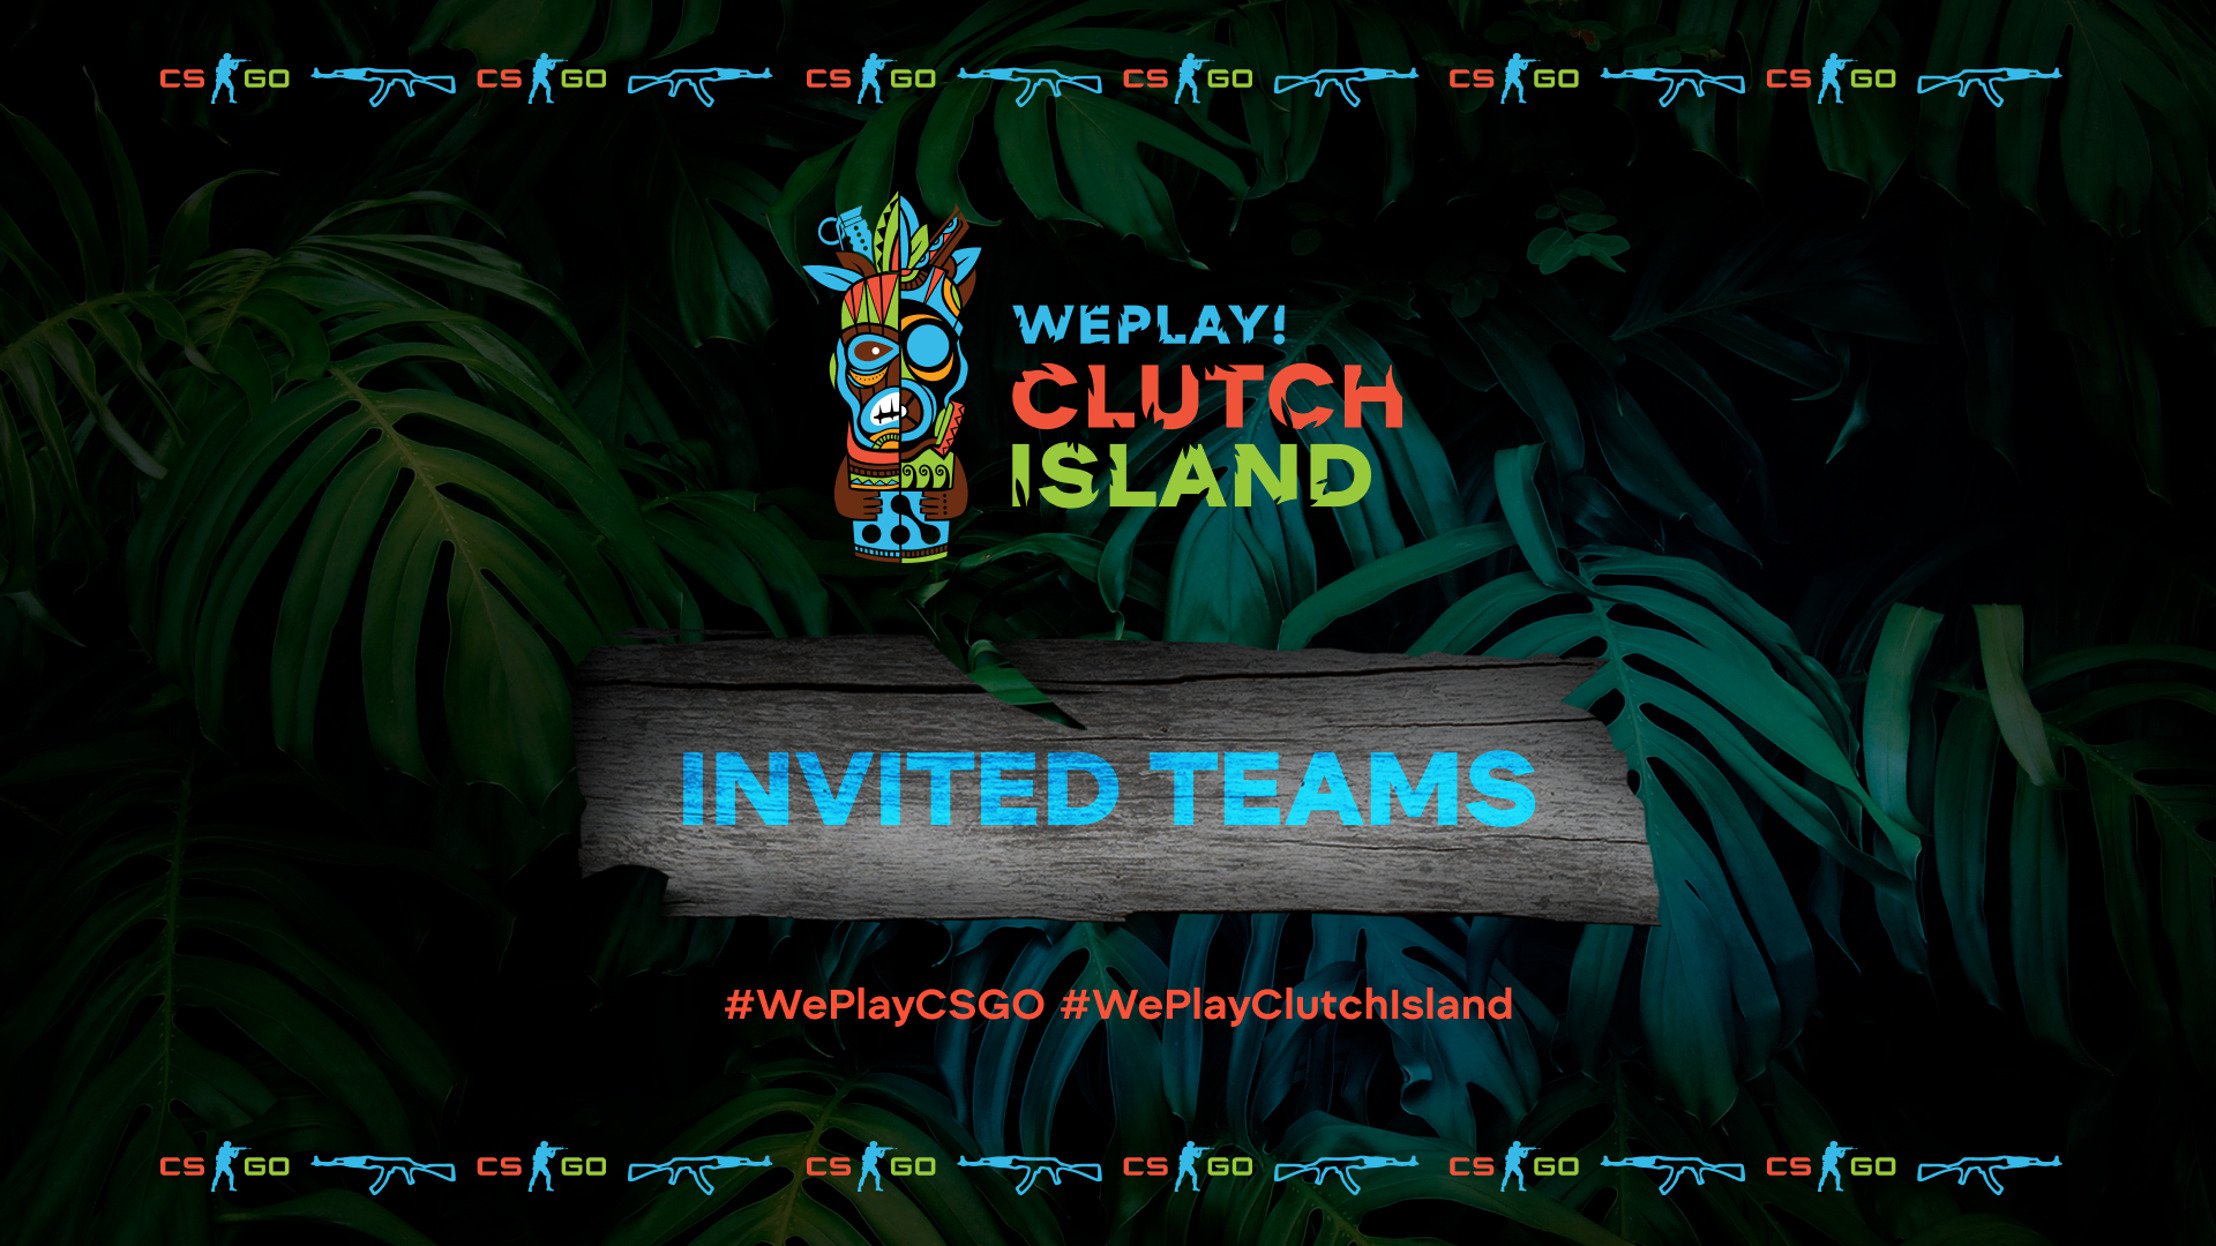 WePlay! Clutch Island invited teams finalized